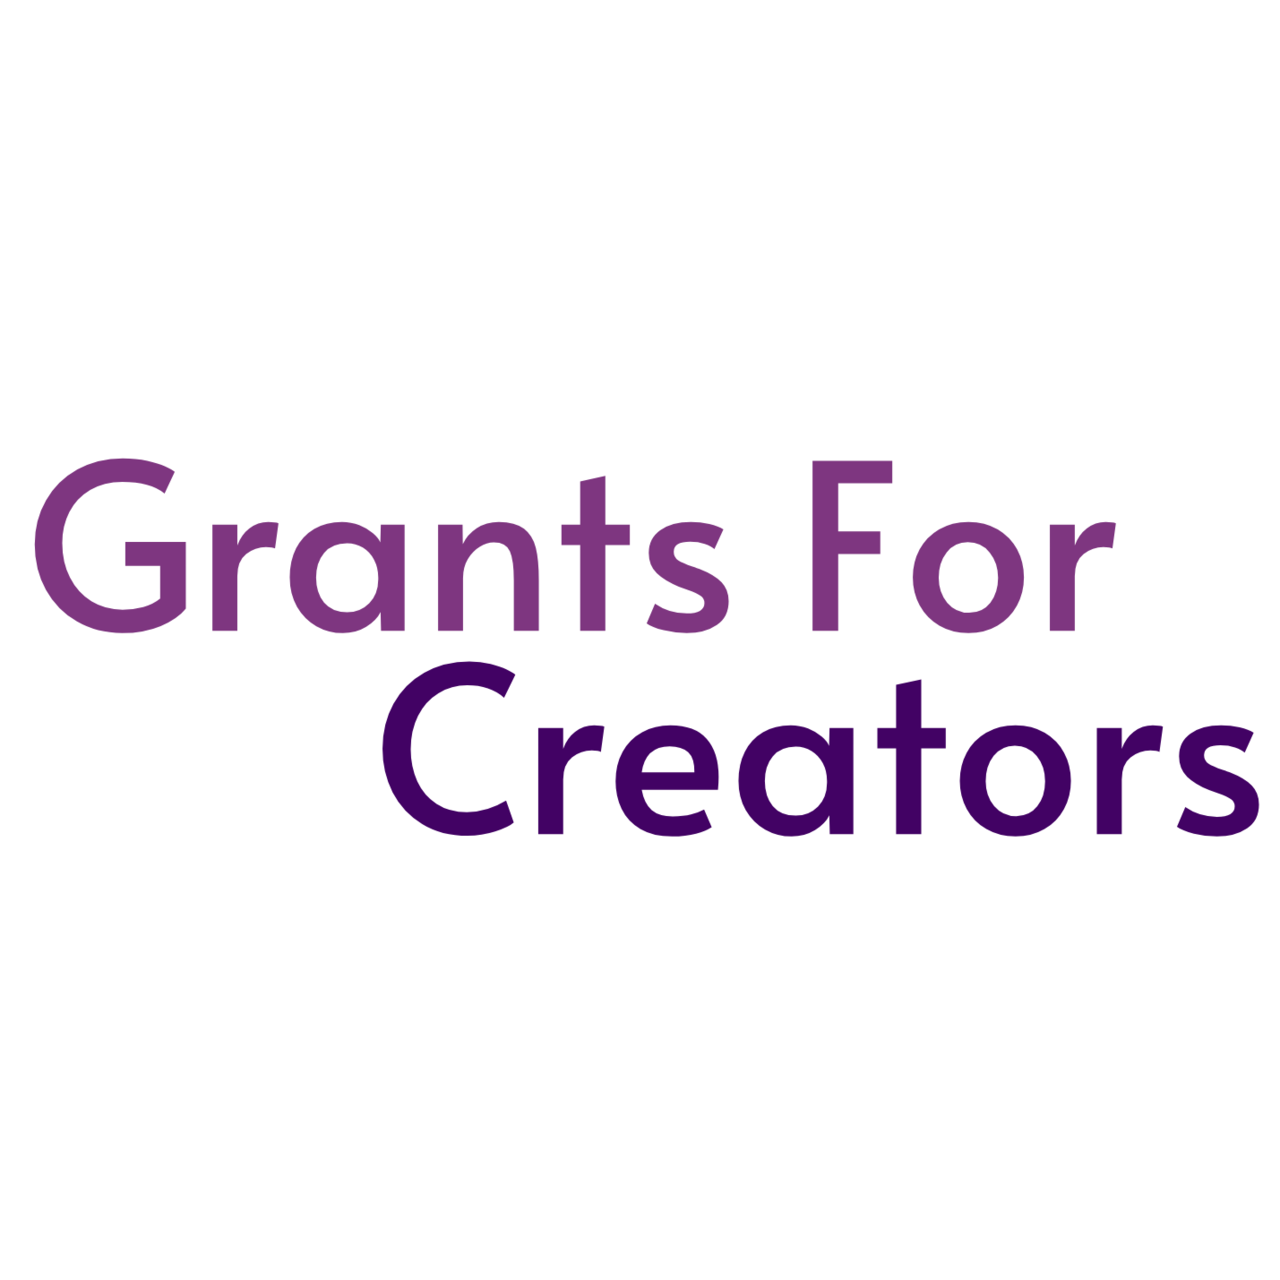 Micro-Grants for Podcasters Programme 2023 – Content is Queen